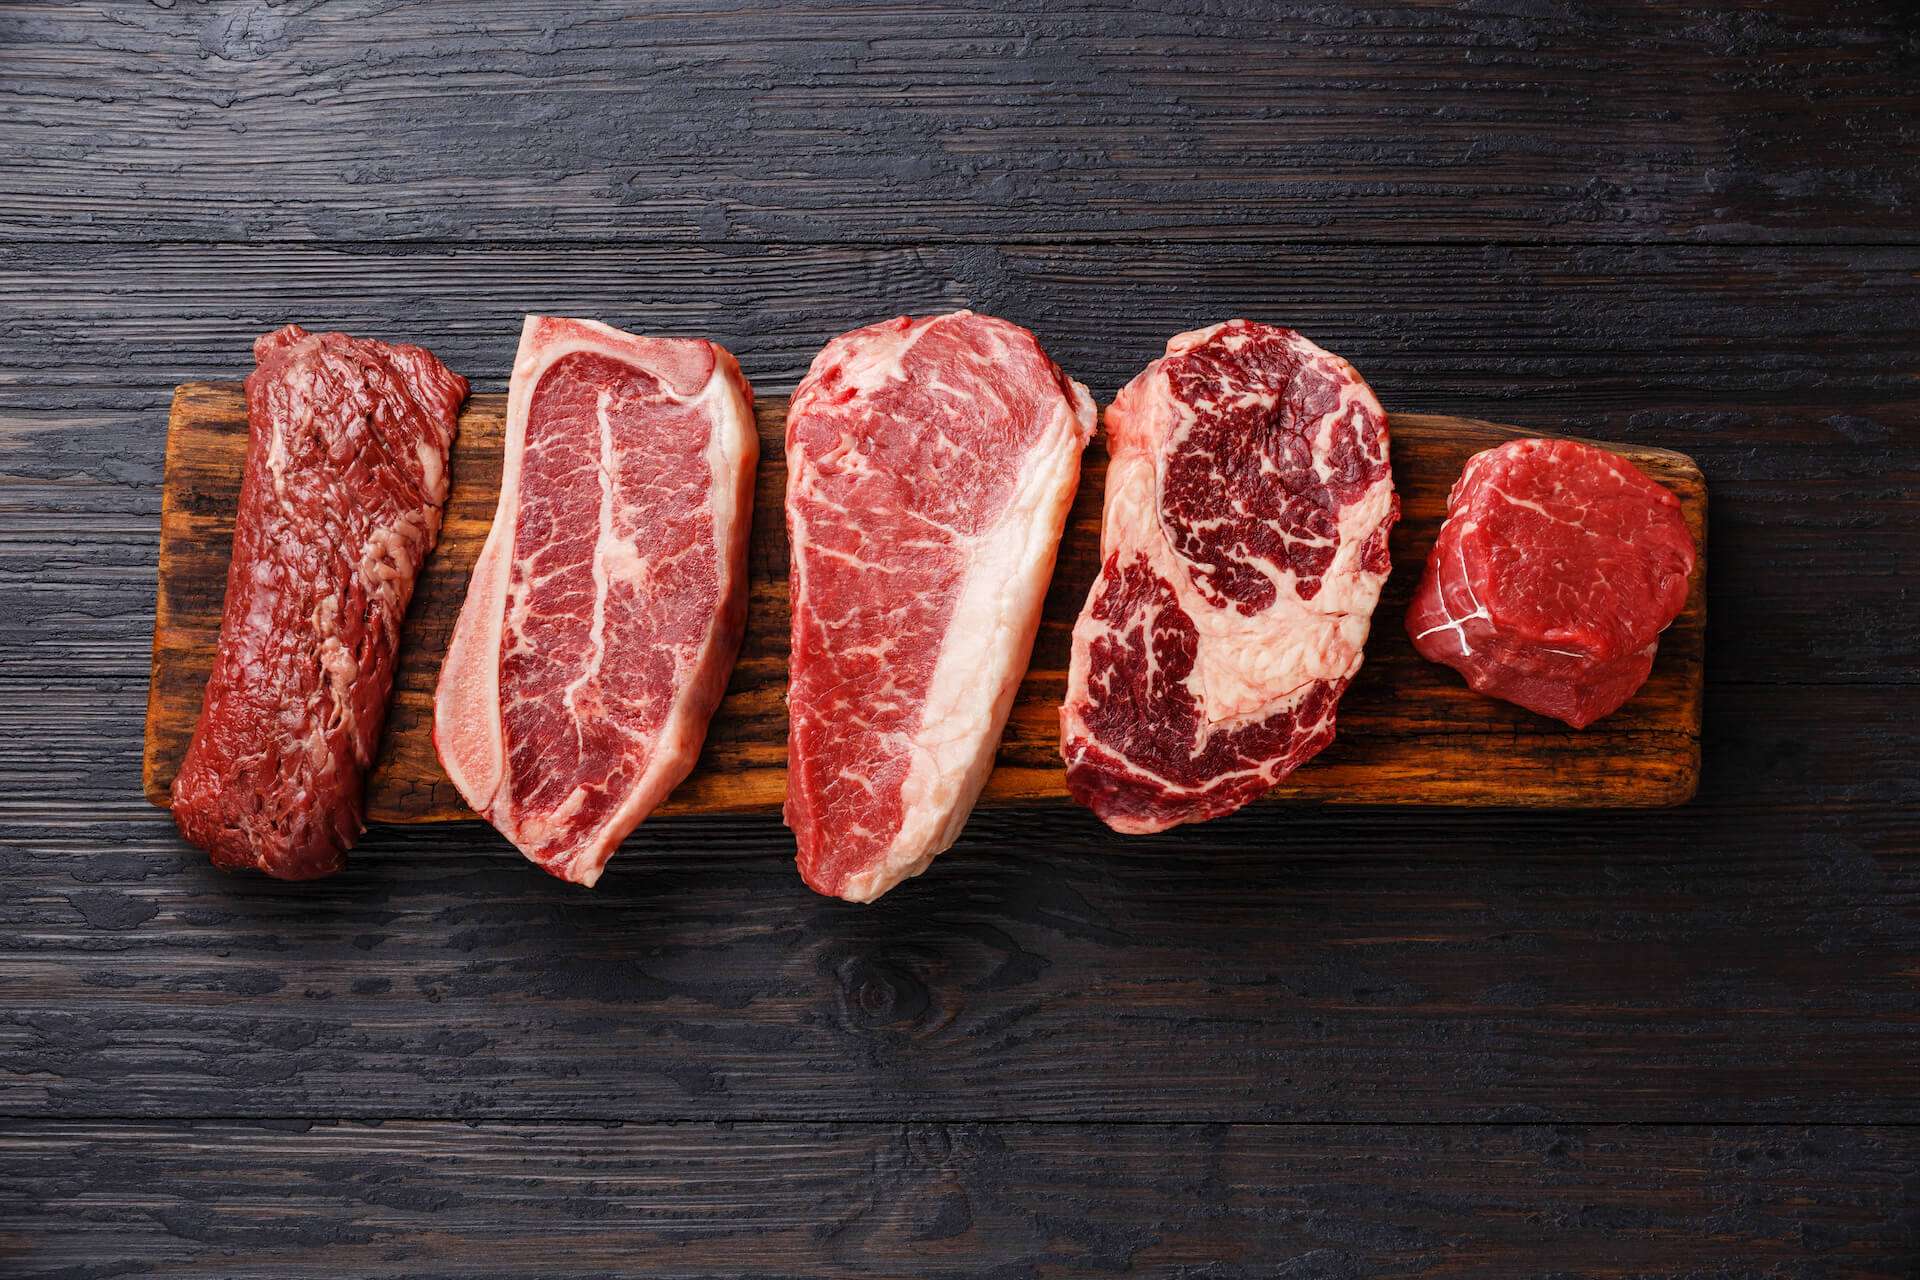 Can eating red meat increase the risk of colon cancer?